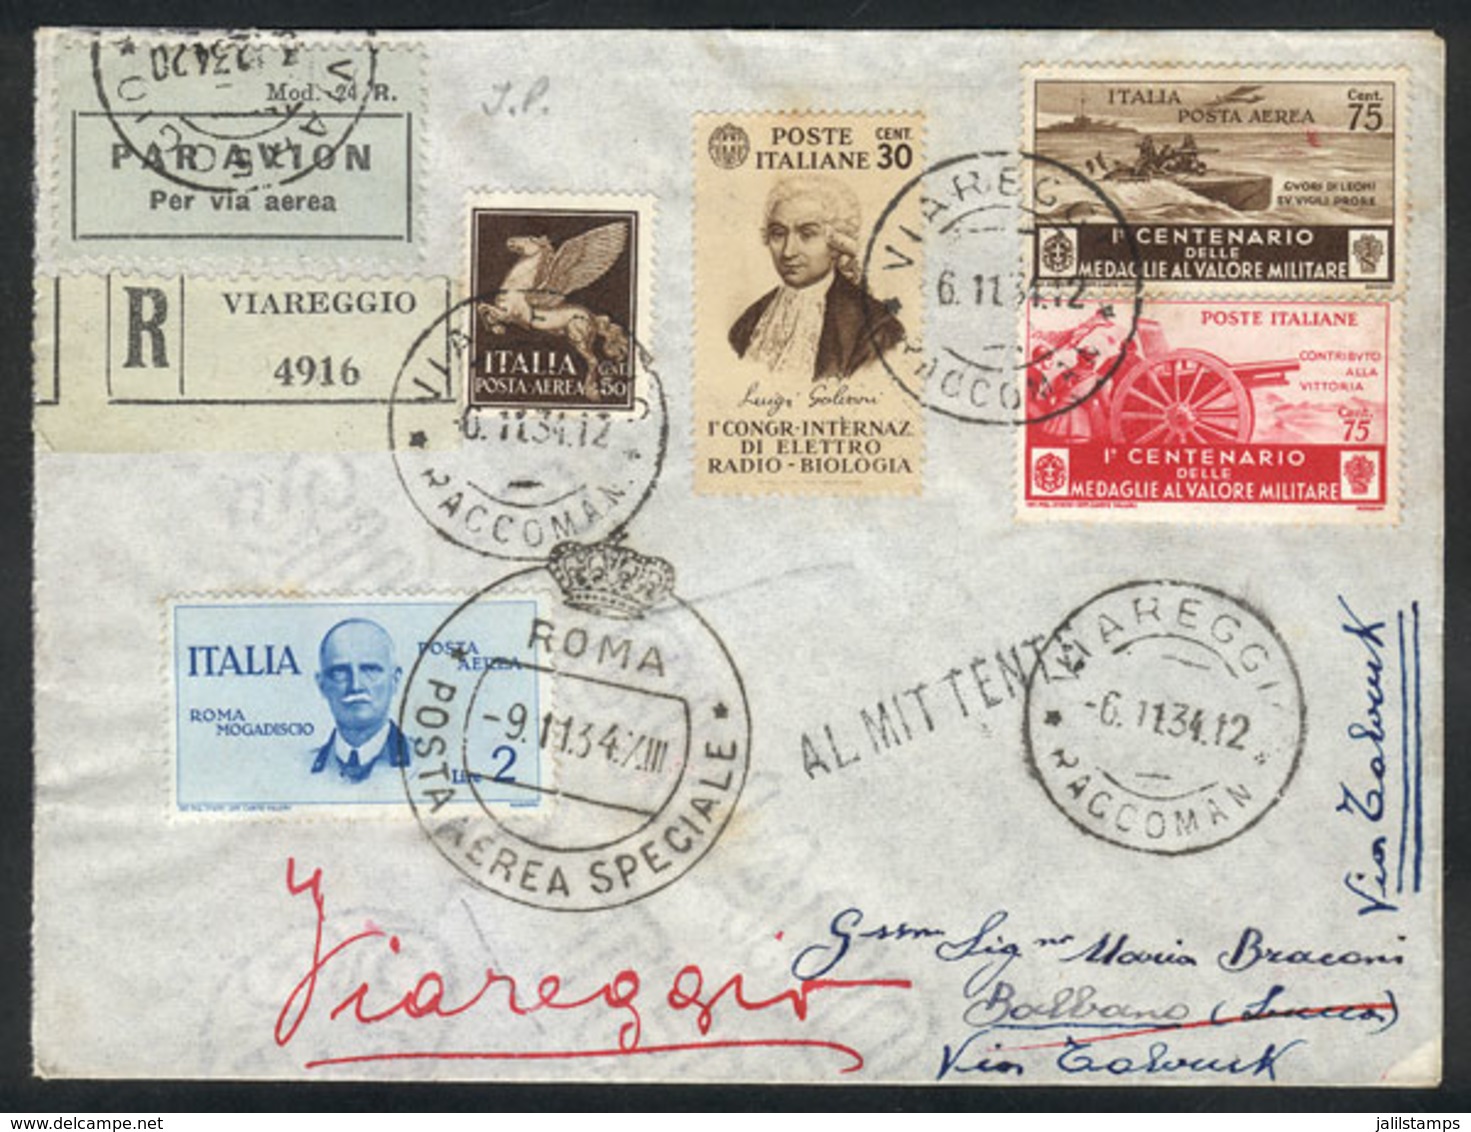 ITALY: 9/NO/1934 Roma - Tobruk: First Airmail By Ala-Littoria, Cover With Special Handstamp And Arrival Mark, Excellent  - ...-1850 Préphilatélie